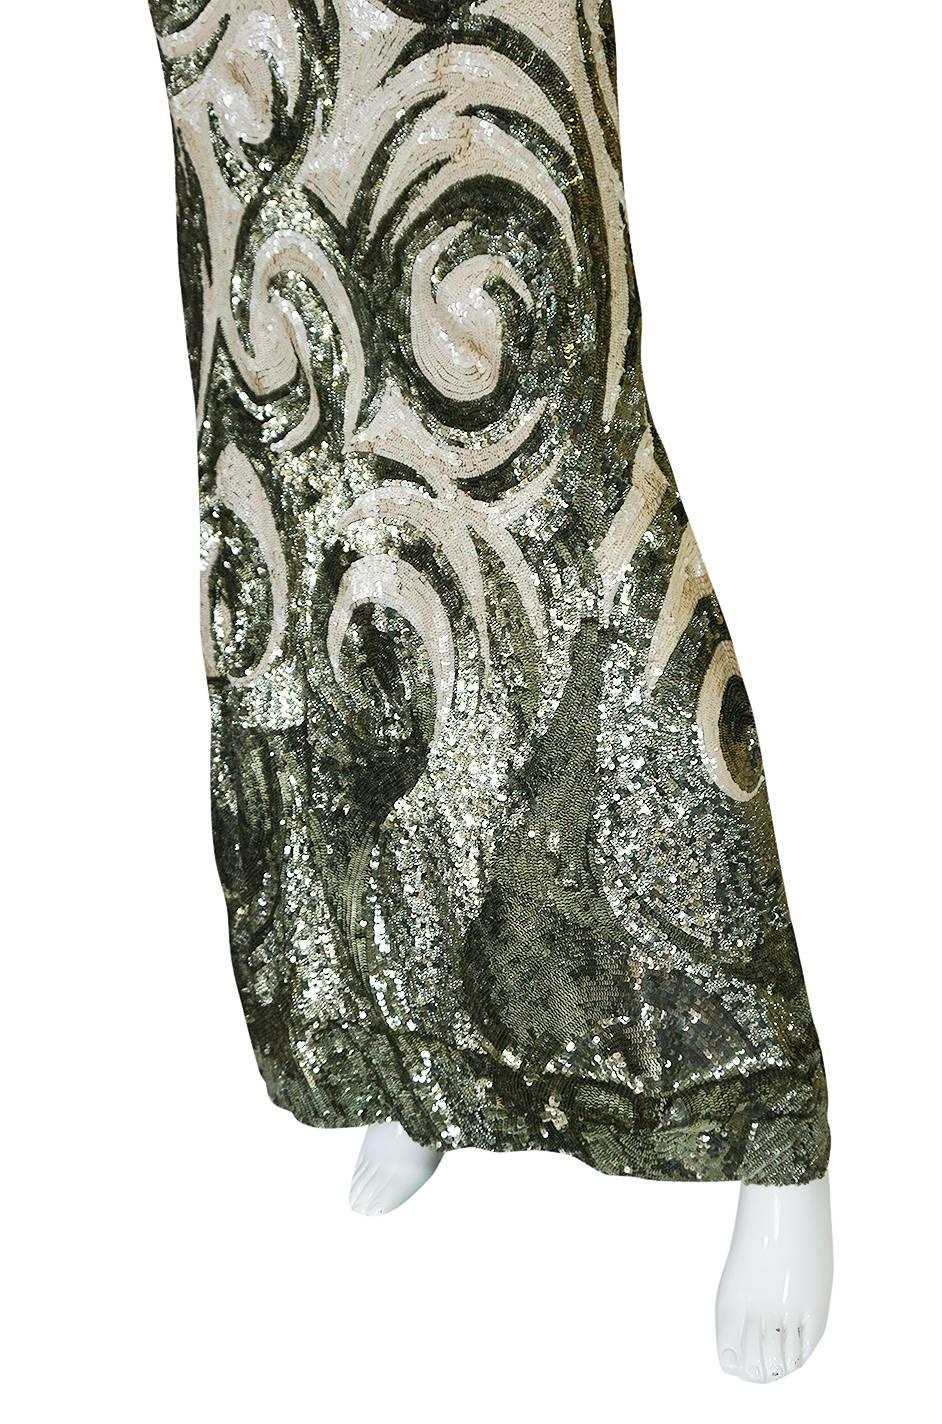 Spectacular 1920s Couture Swirling Gold & Cream Sequin Dress 2